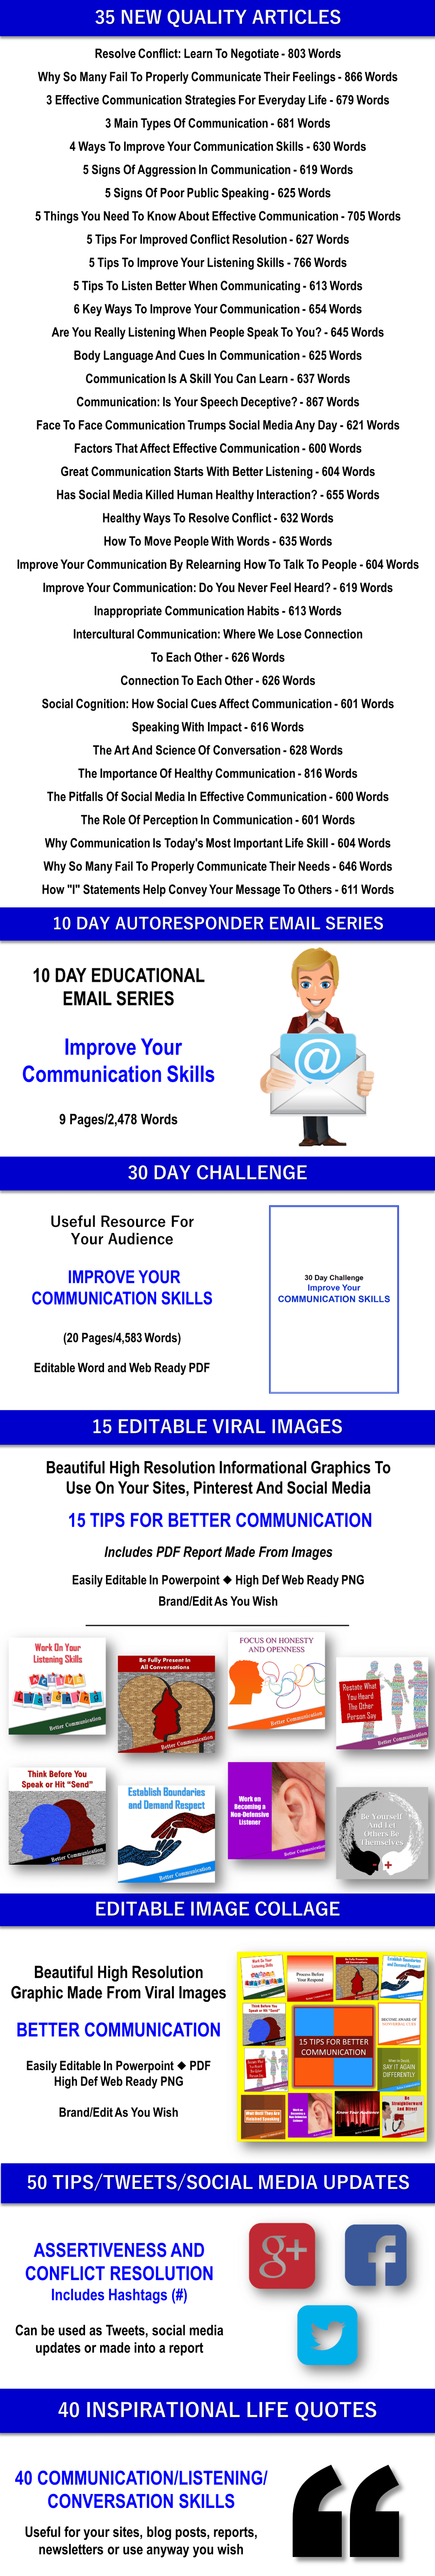 PERFECT YOUR COMMUNICATION SKILLS content with PLR Rights